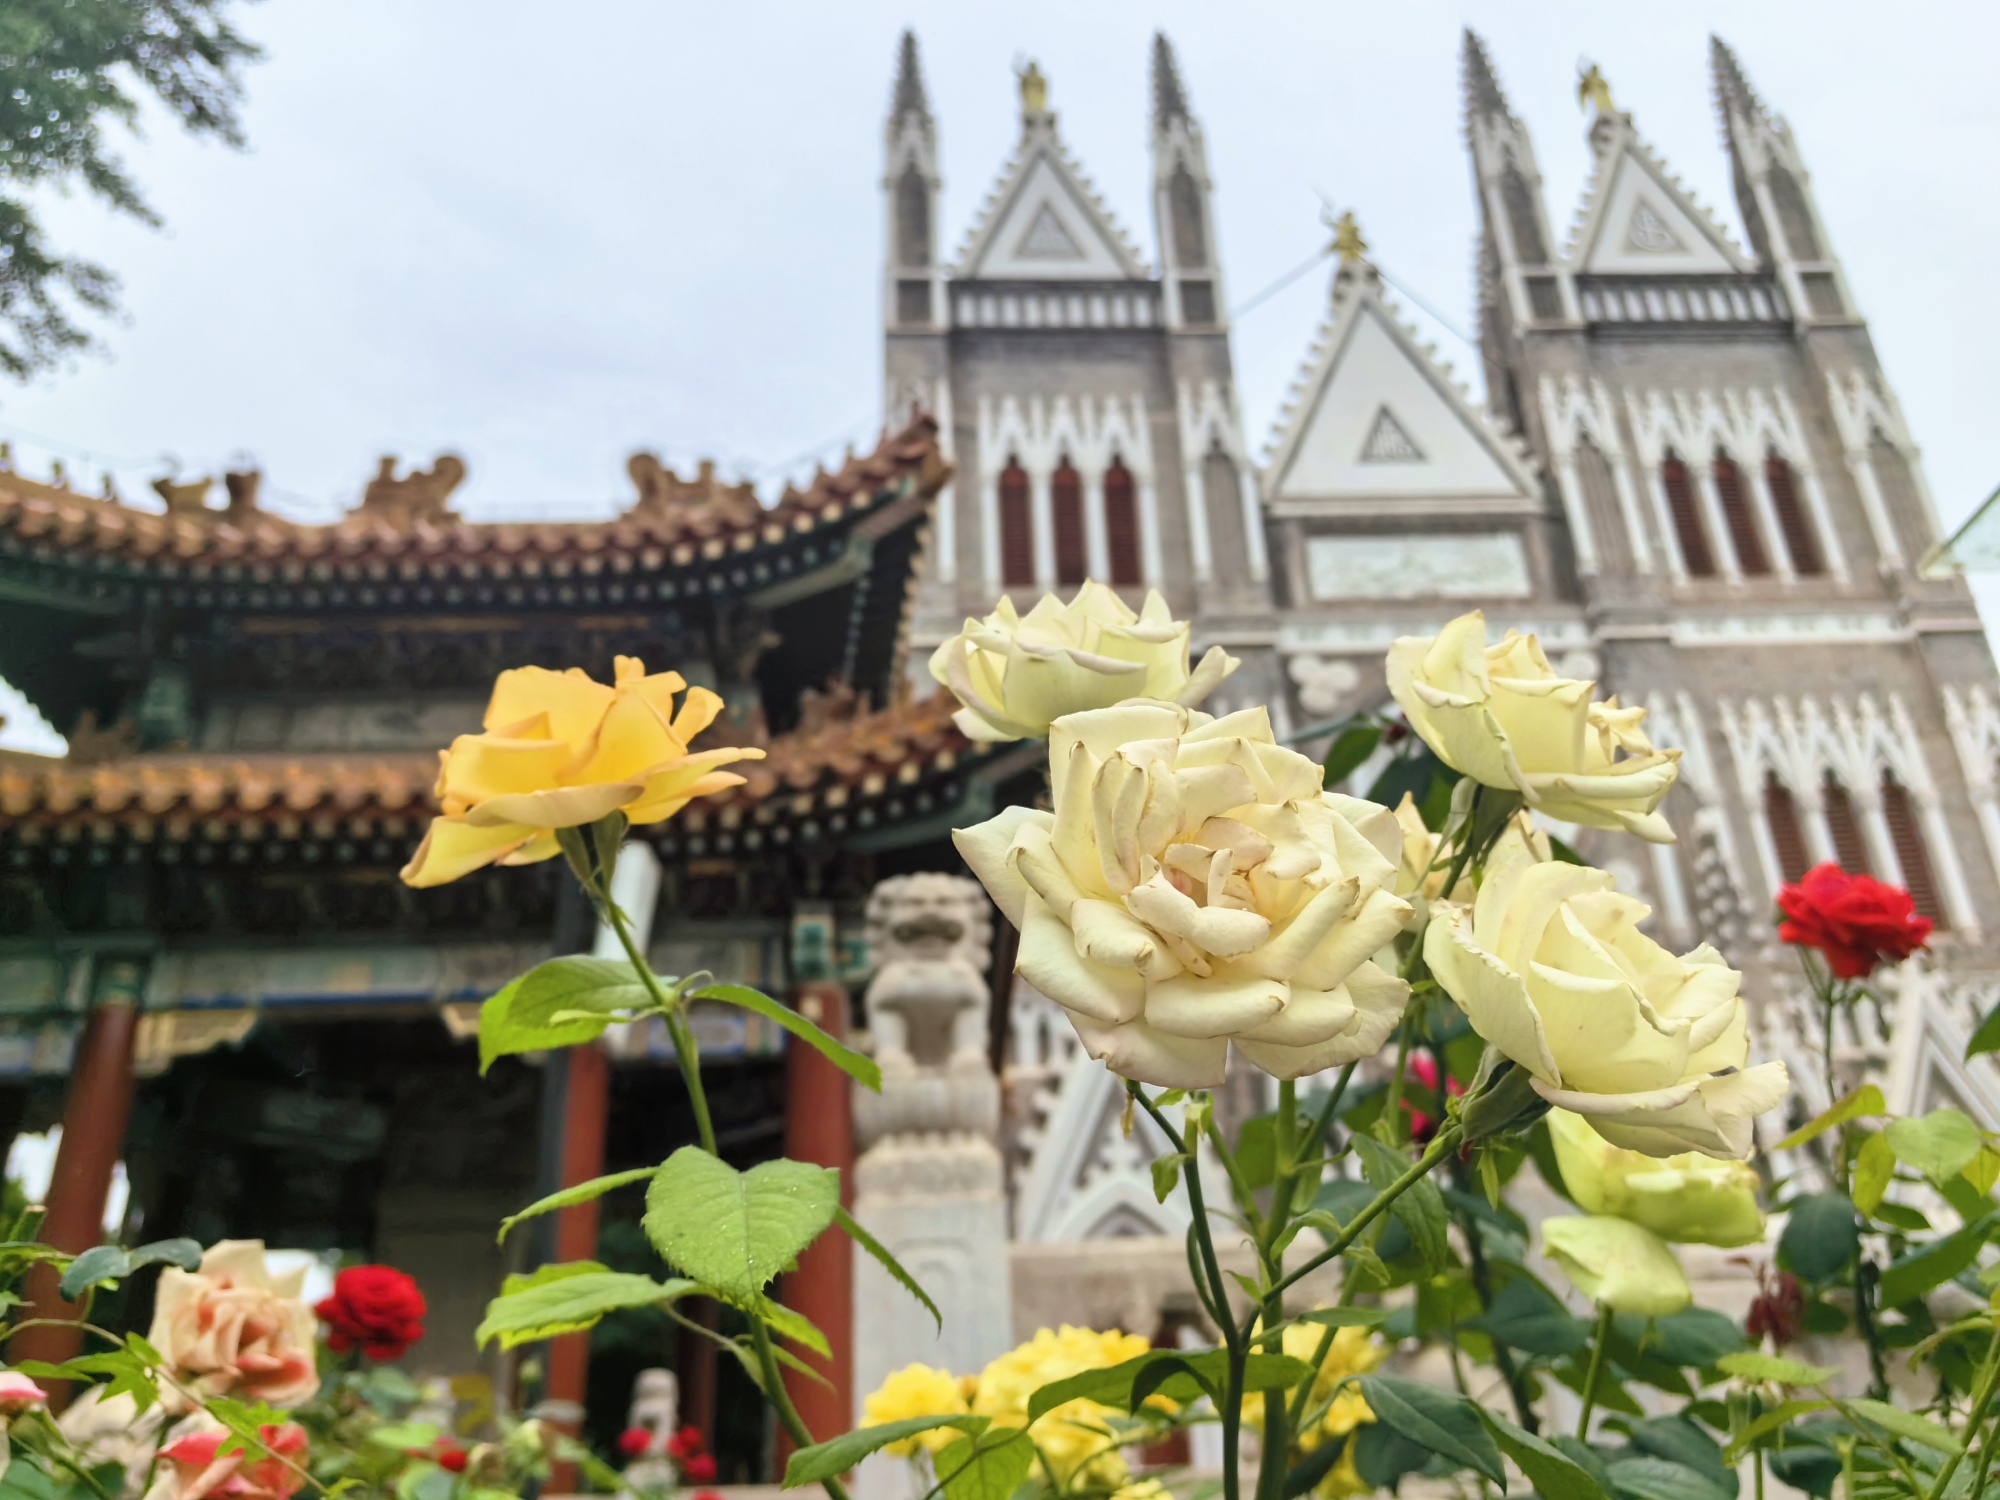 Xishiku Catholic Church in Beijing is a blend of western Gothic and traditional Chinese imperial garden architectural styles. /CGTN